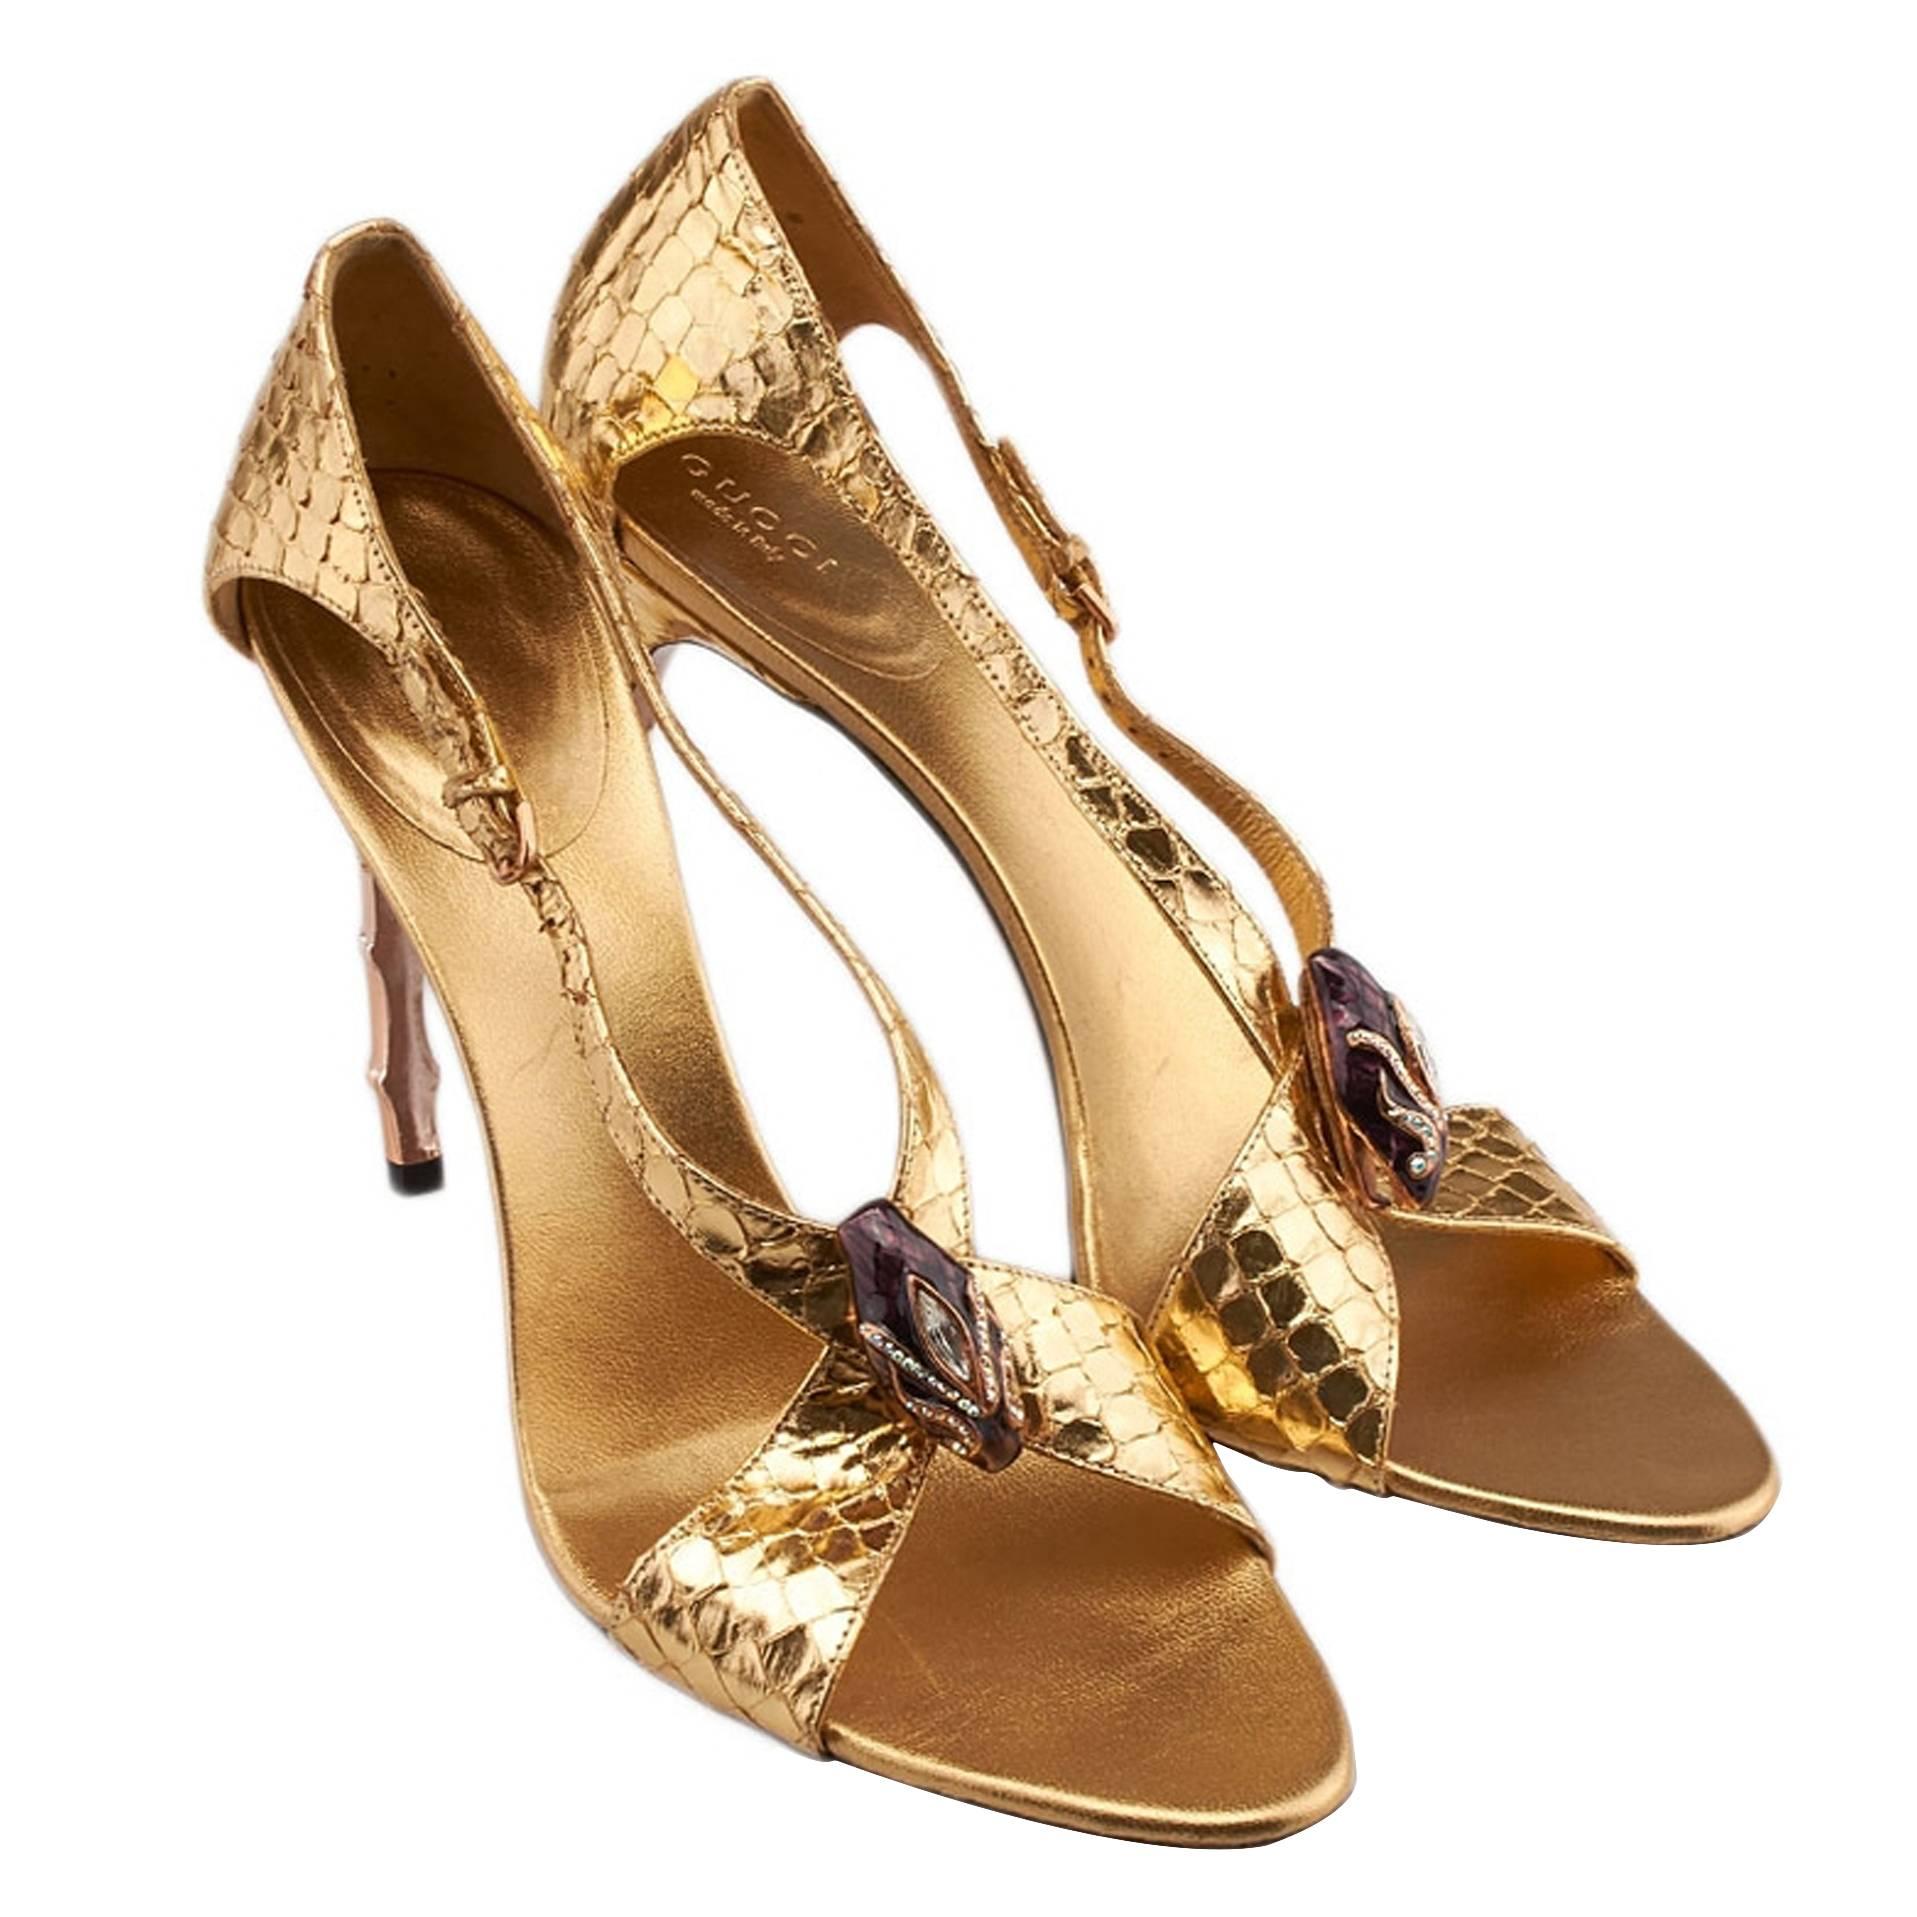 Tom Ford for Gucci Gold Python Jeweled Bamboo Heel Shoes 